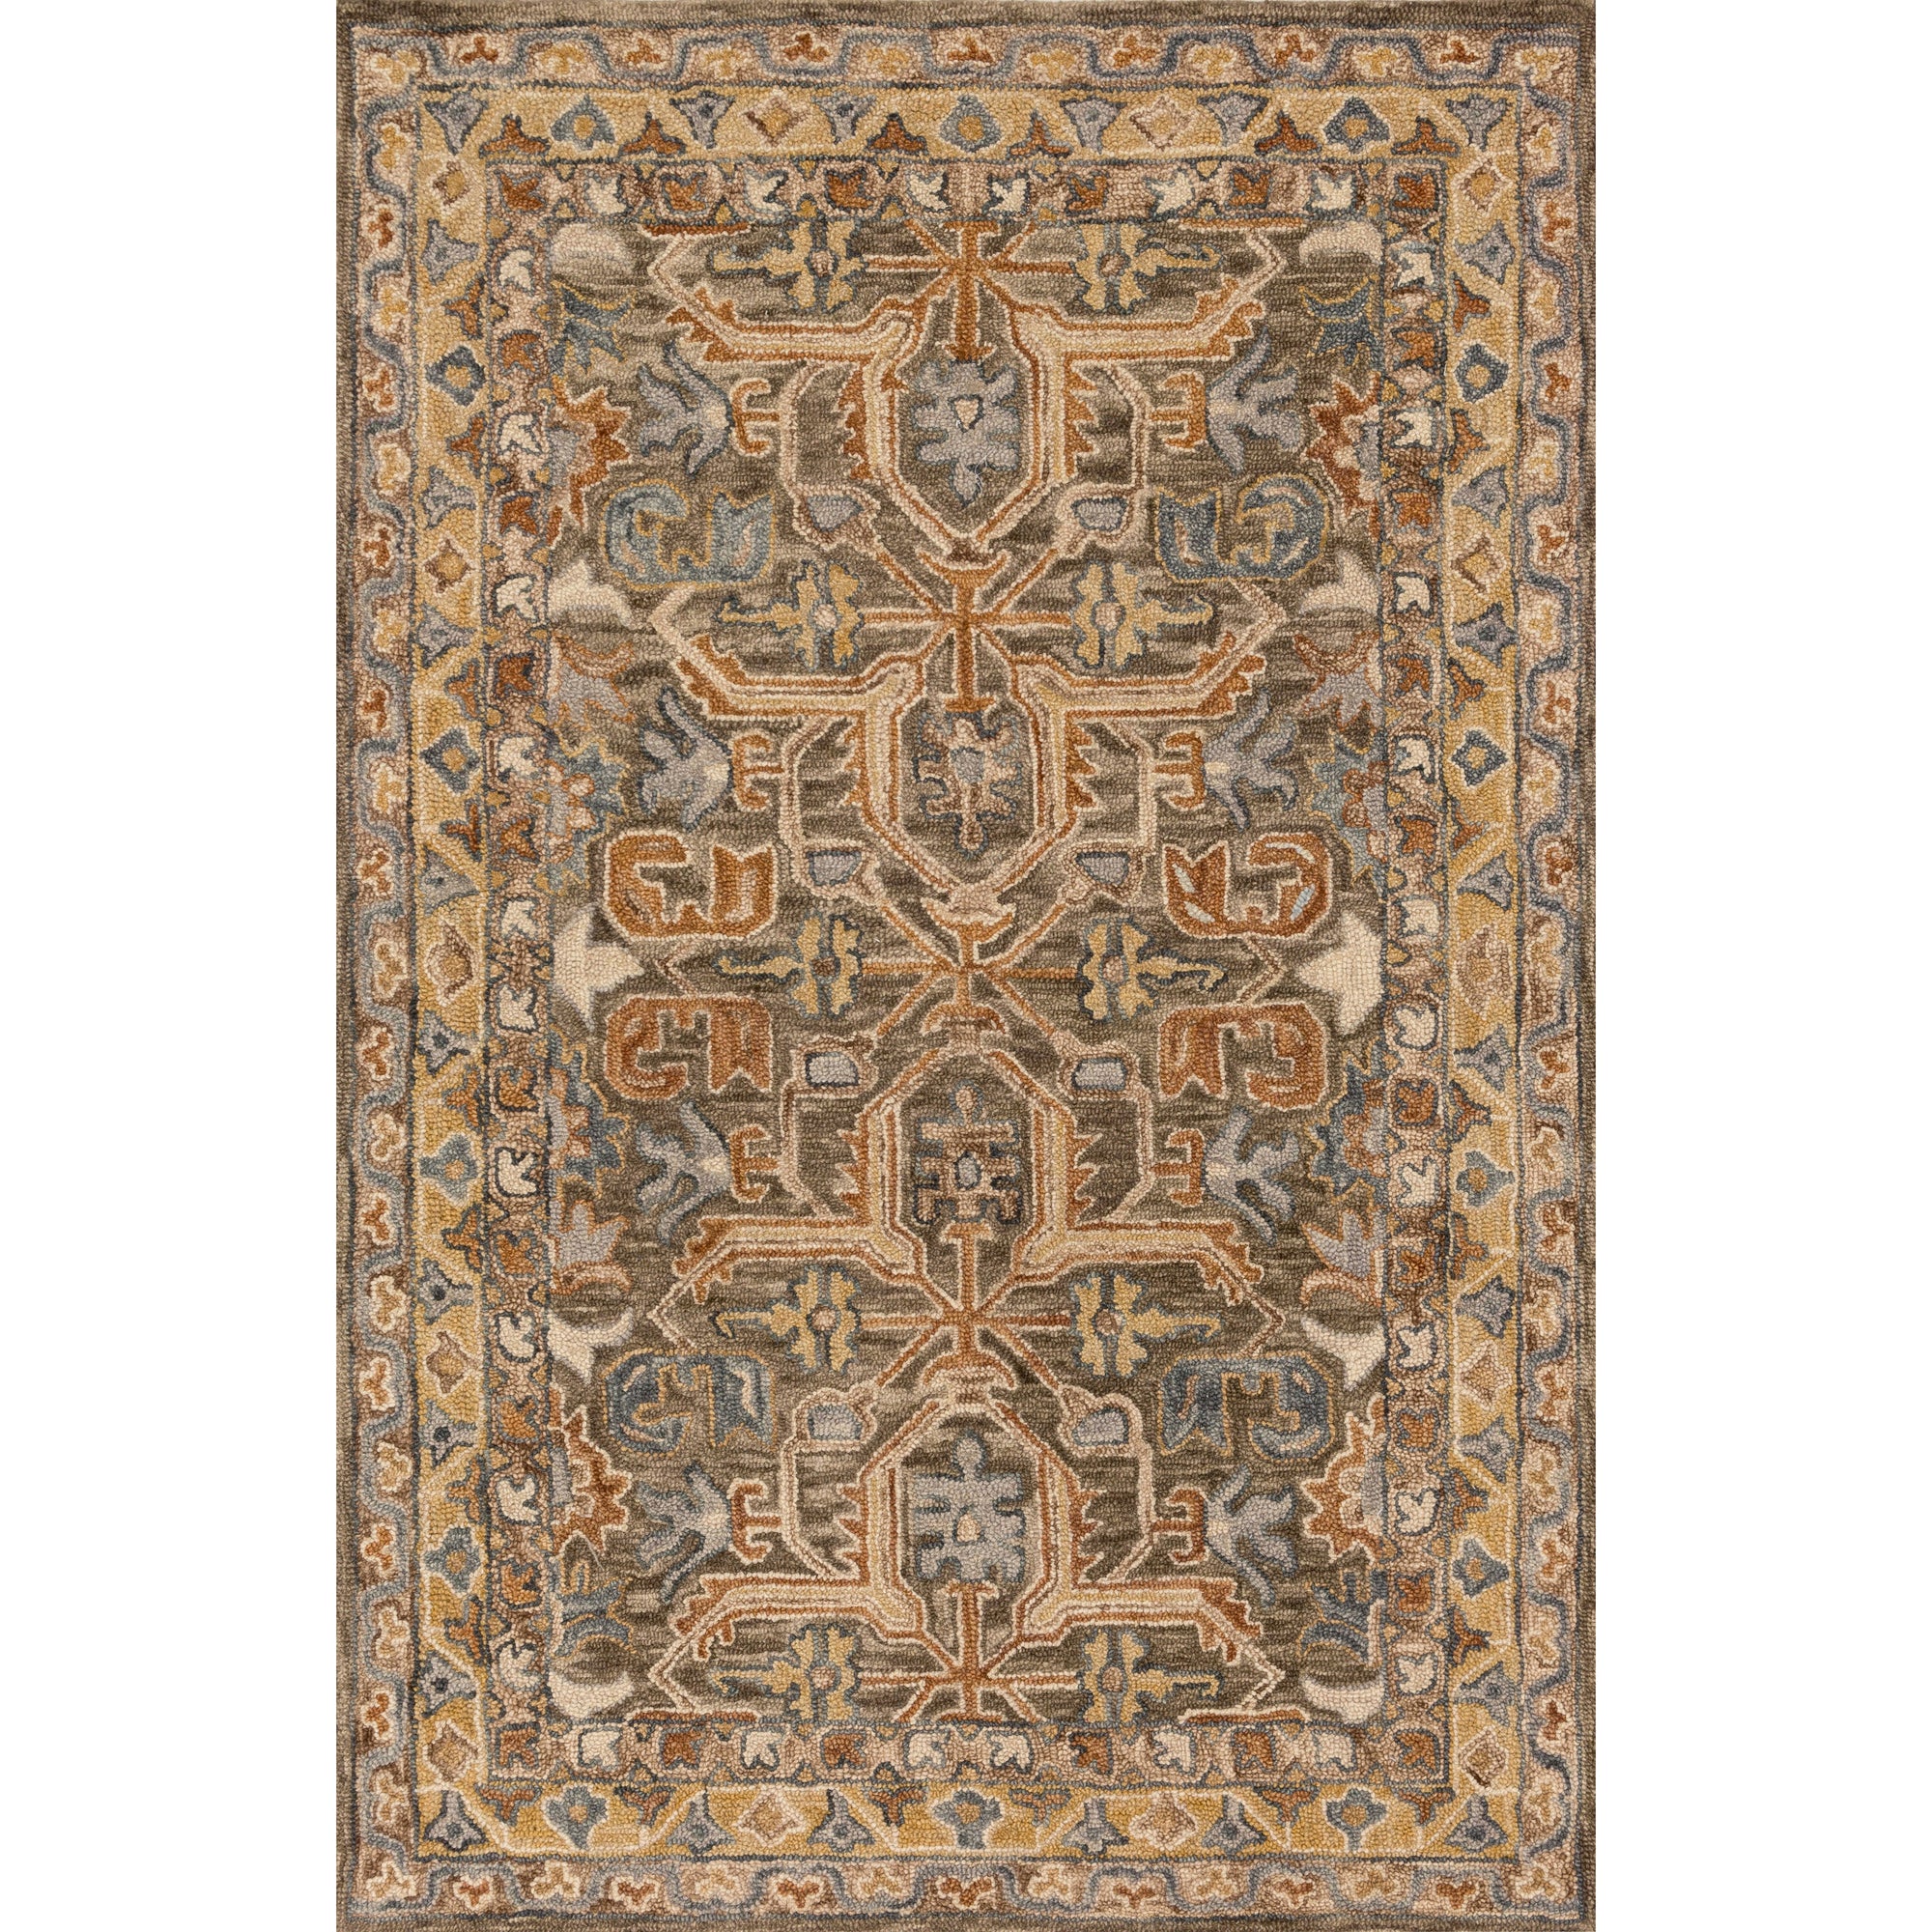 Rugs by Roo Loloi Victoria Walnut Multi Area Rug in size 18" x 18" Sample